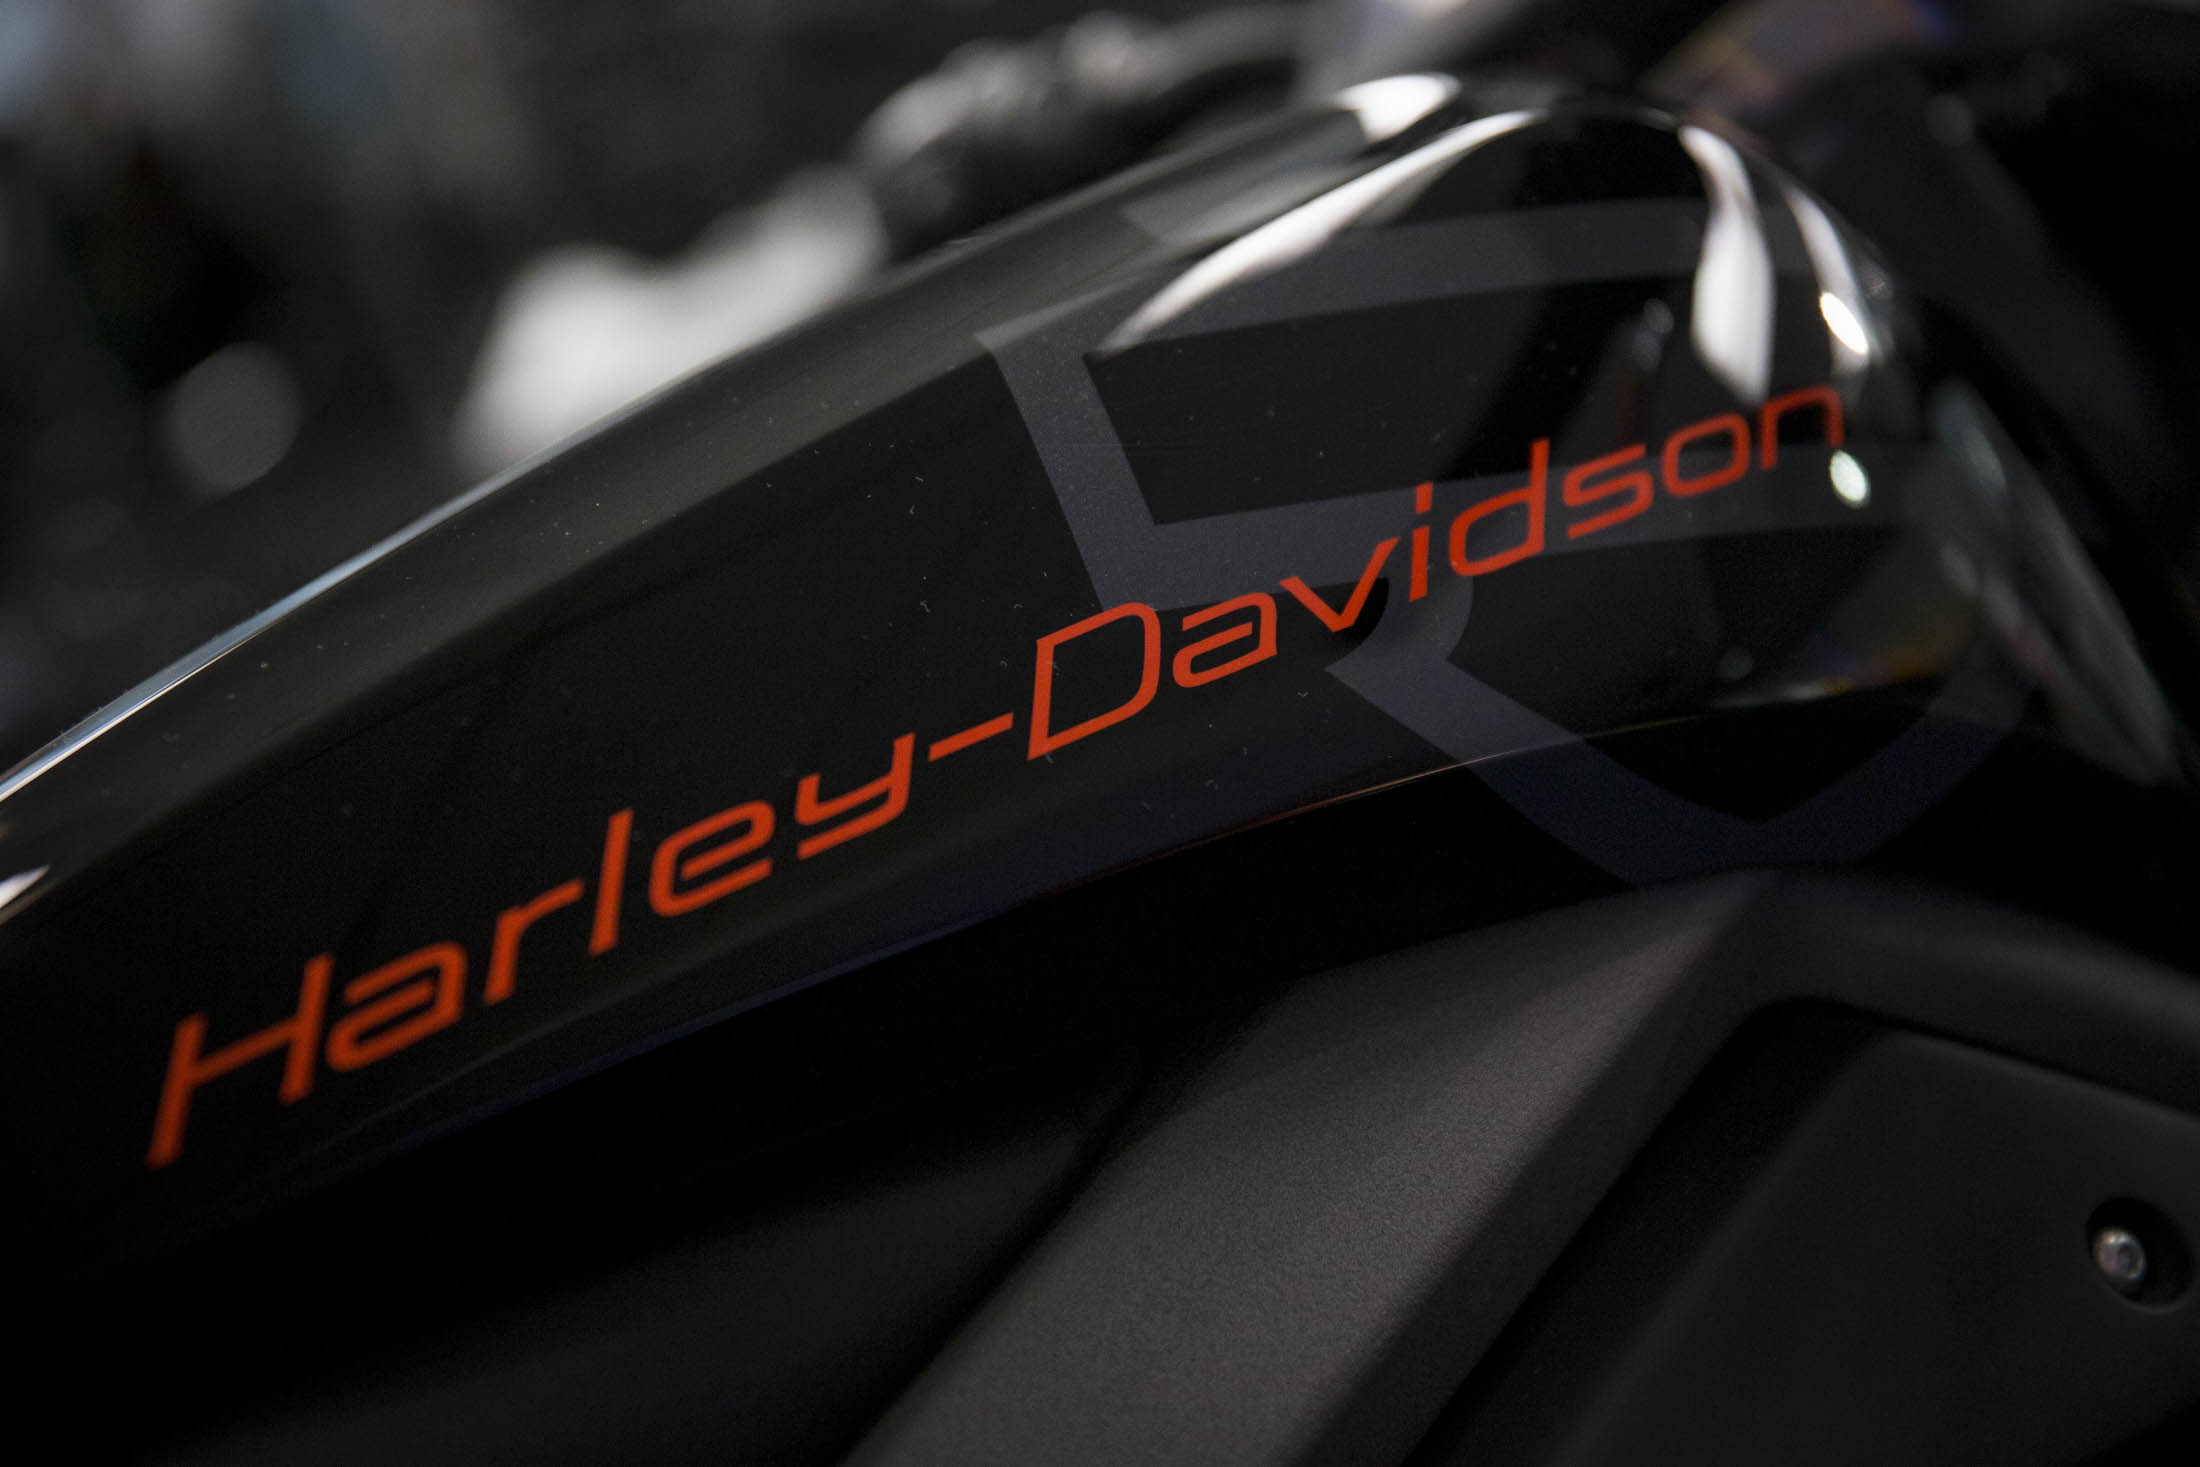 A Harley-Davidson Inc. LiveWire electric motorcycle sits parked in the Bloomberg Television studios in New York, U.S., on Monday, June 23, 2014. Harley-Davidson Inc., whose storied highway cruisers are as loud as they are large, will take 22 electric bikes on a U.S. tour to solicit reactions that will help shape the environmentally aware vehicle's development. Depending on the feedback, the no-exhaust Harley may never make it out of R&D. Photographer: Scott Eells/Bloomberg